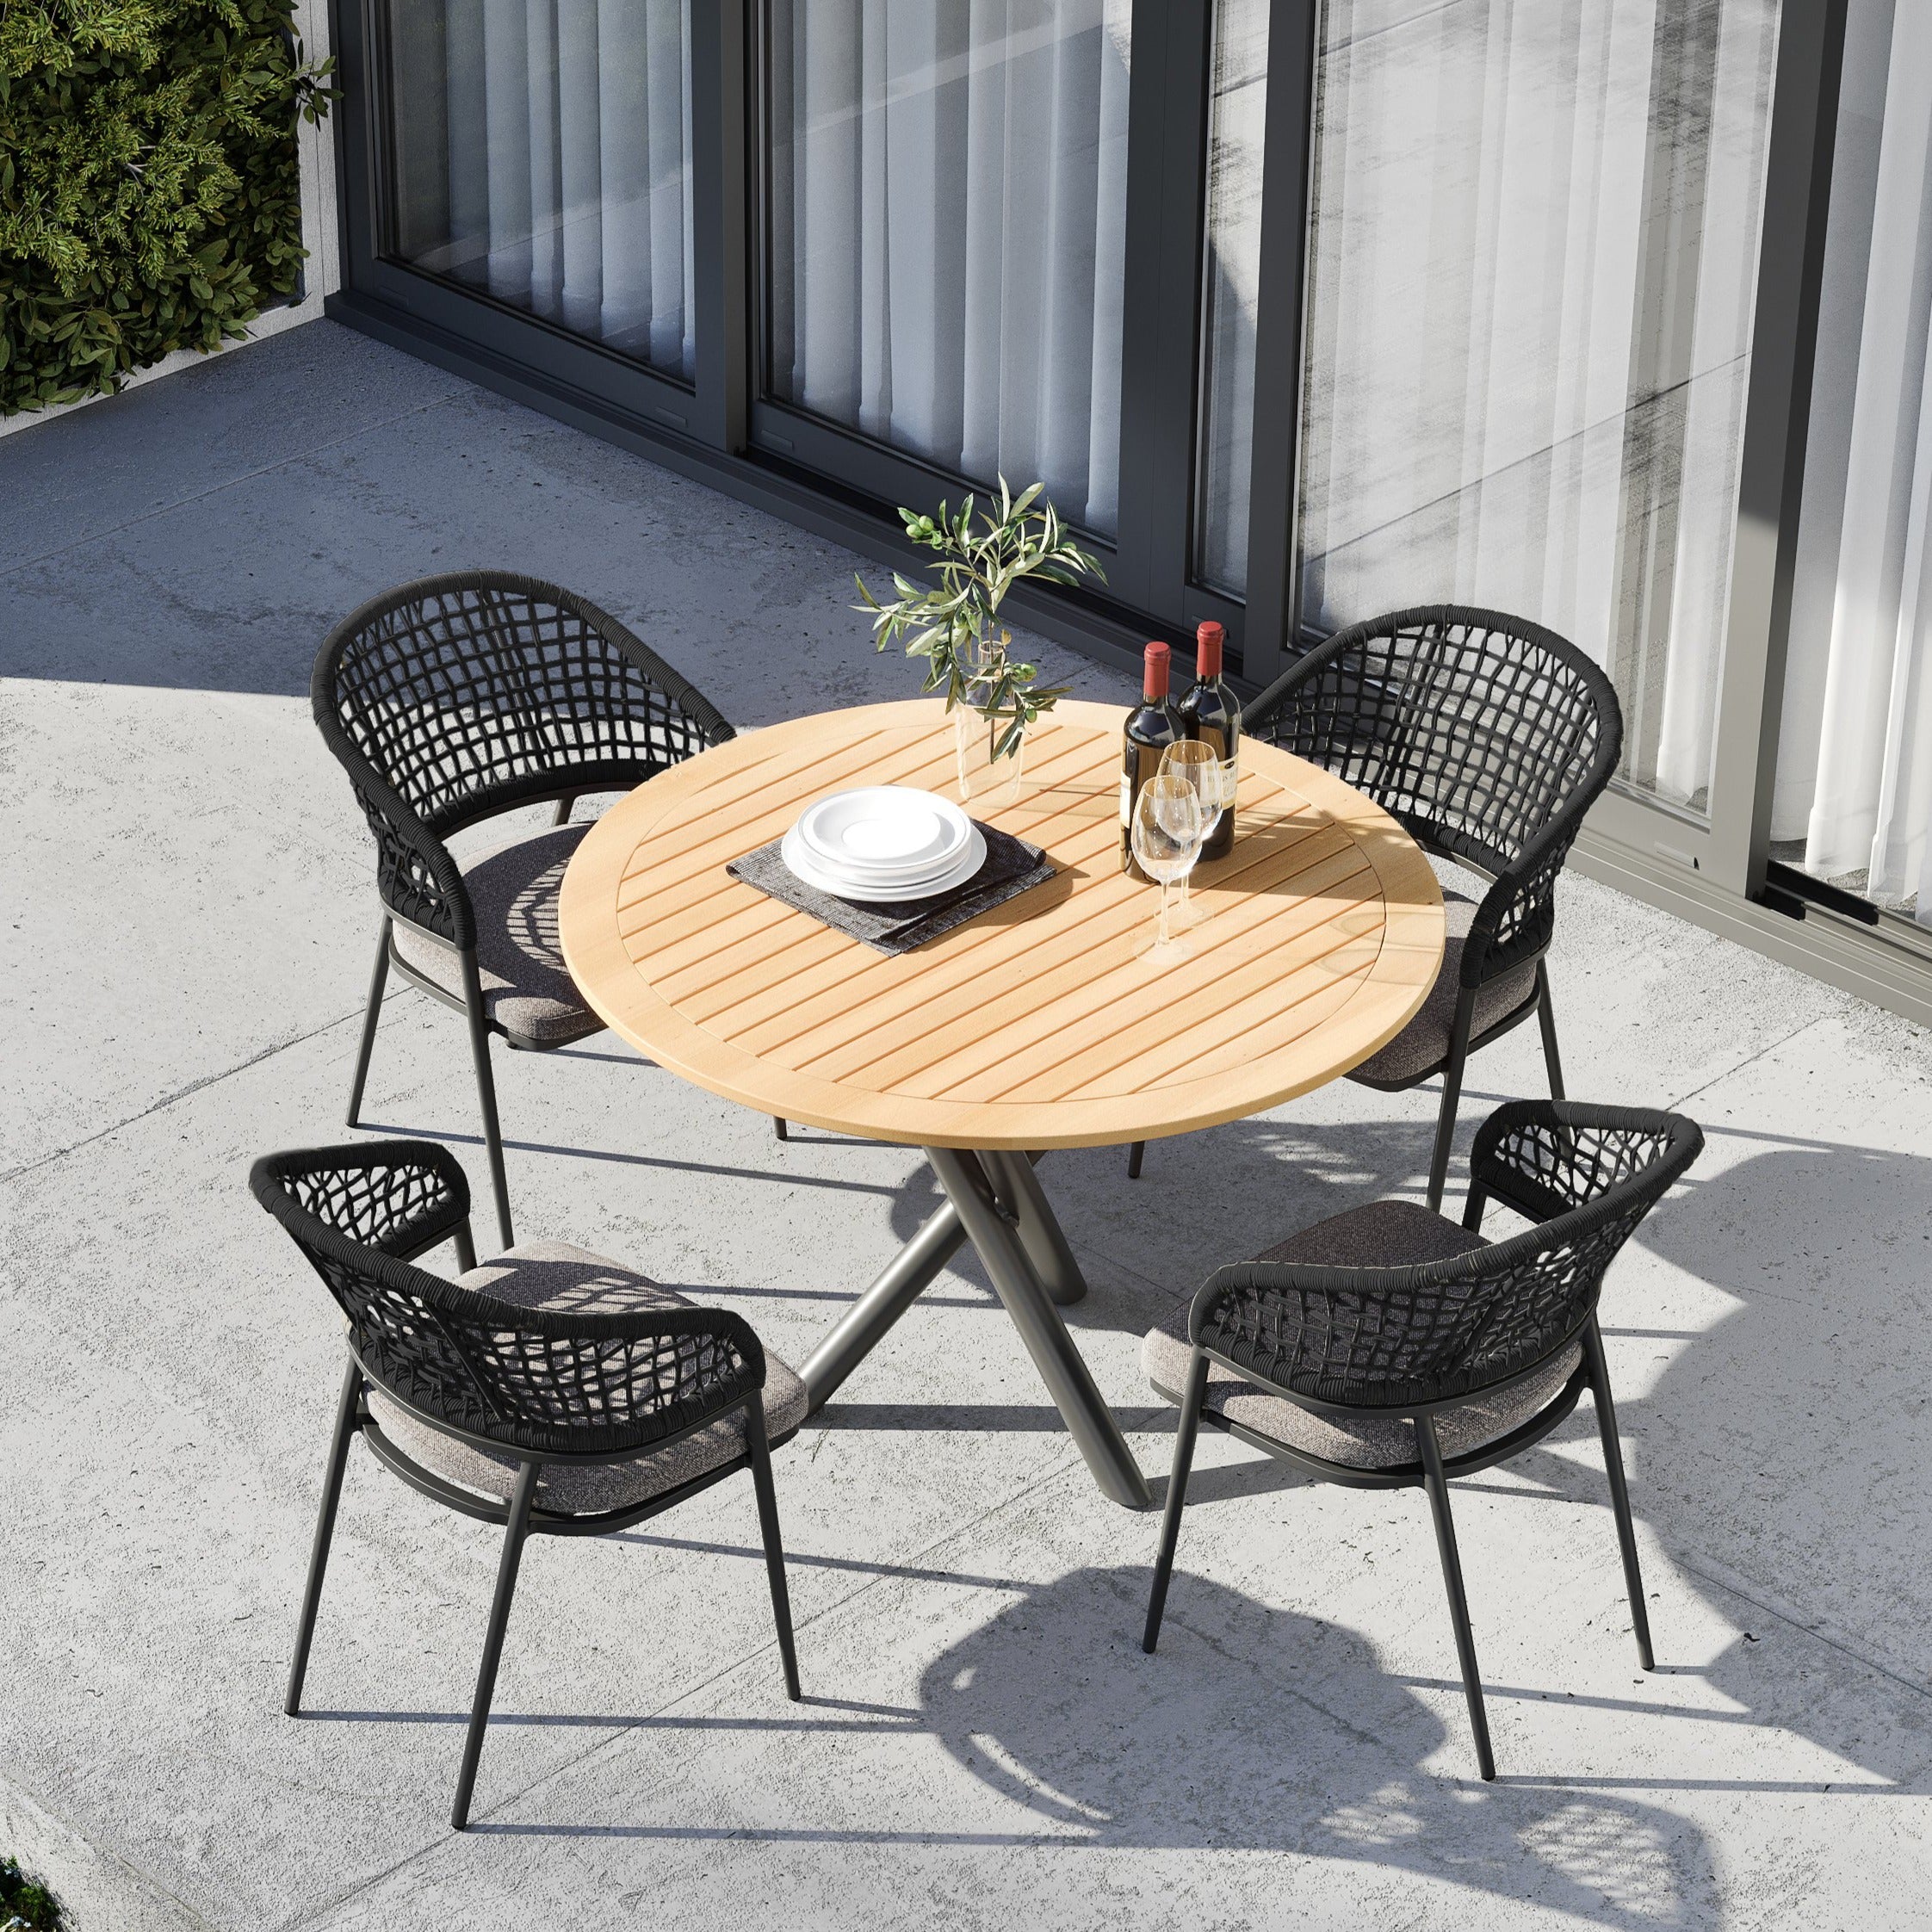 Kalama 4 Seat Round Dining Set with Teak Table in Charcoal